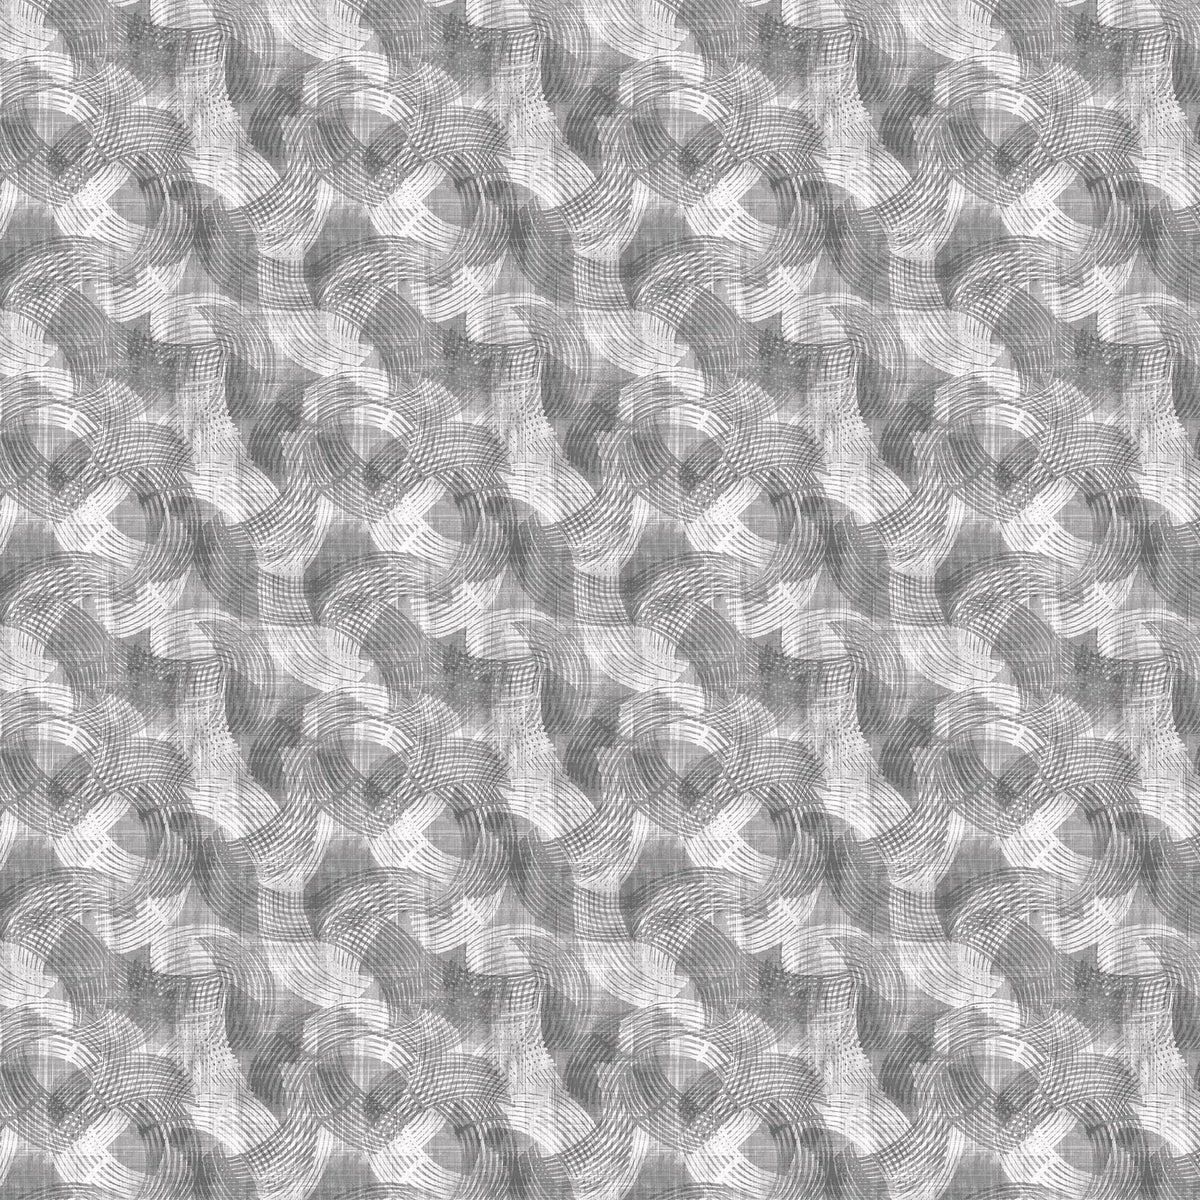 108" Crescent Quilt Backing Fabric - Textured Arcs in Light Gray - 2970-90